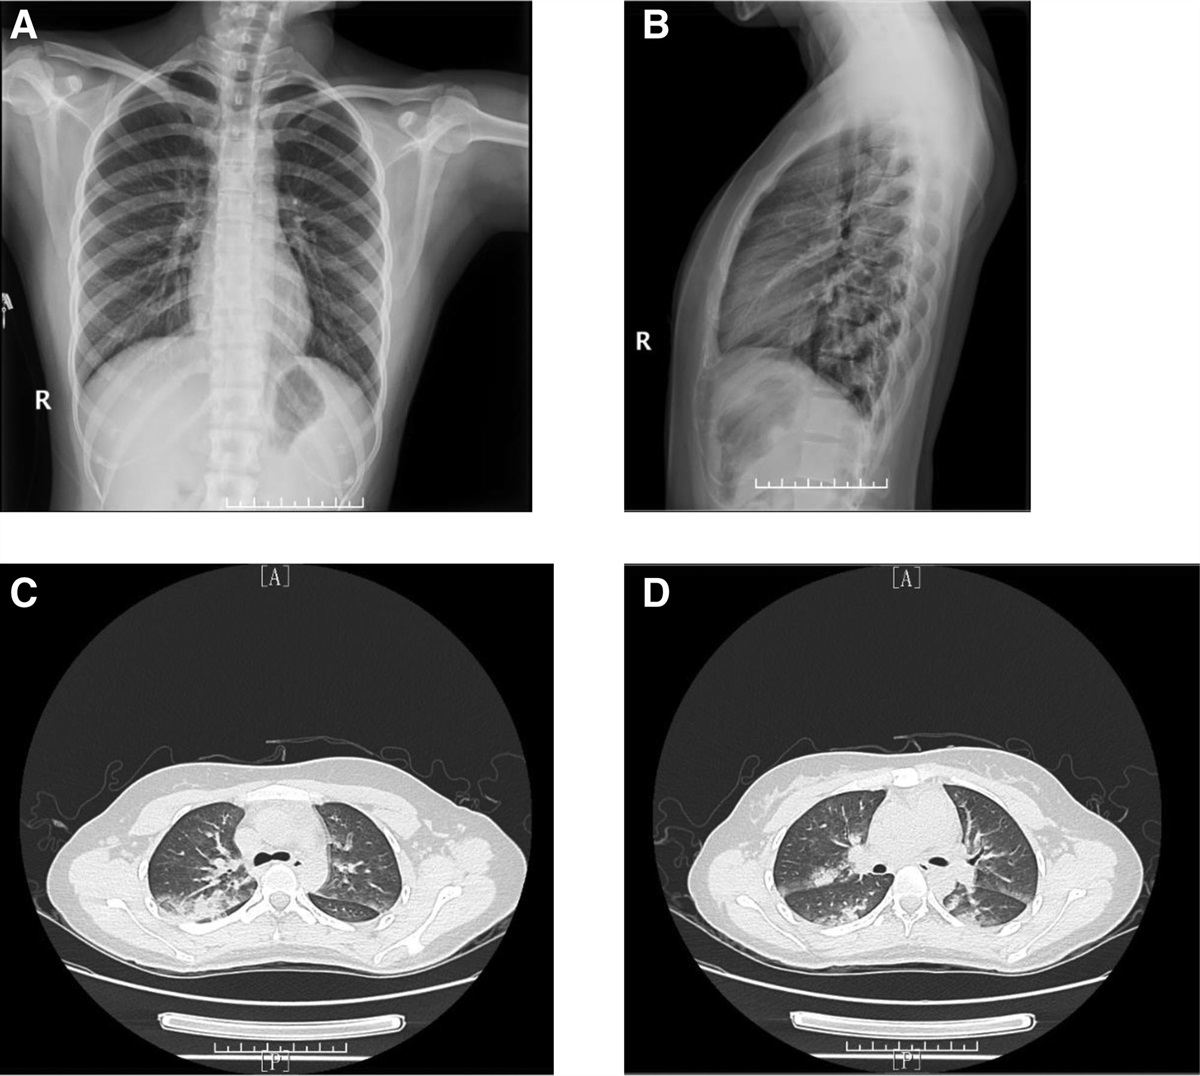 Negative pressure pulmonary edema after laparoscopic cholecystectomy: A case report and literature review